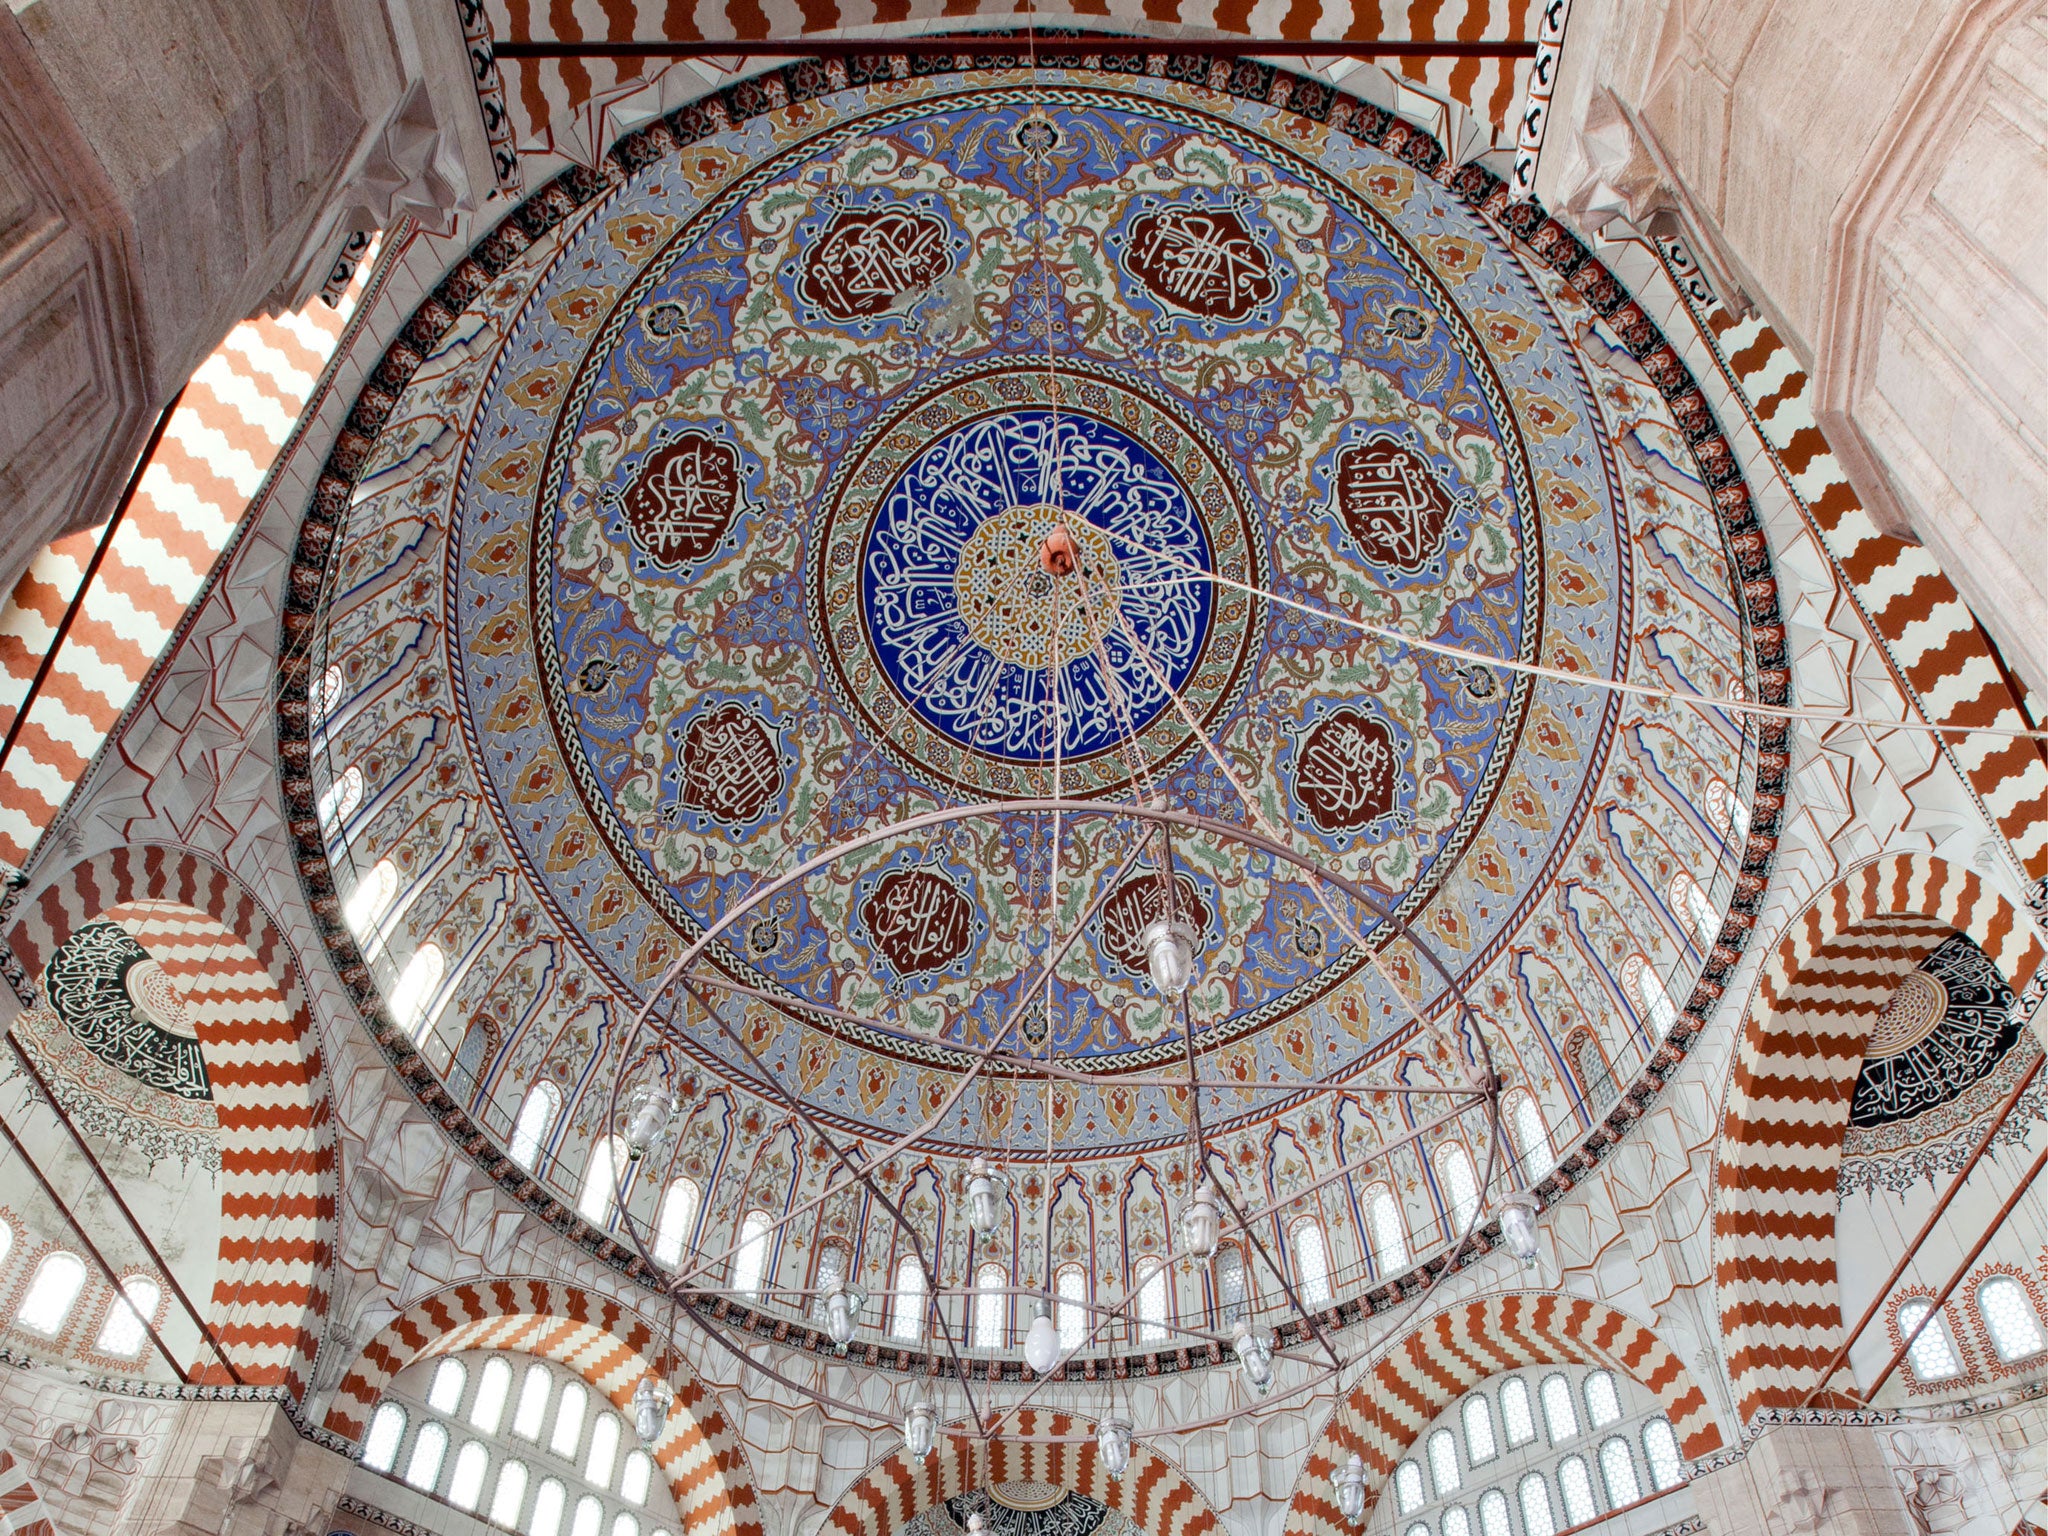 Entirely his own vault: Selimiye Mosque, in Turkey, built by Mimar Sinan, 1575